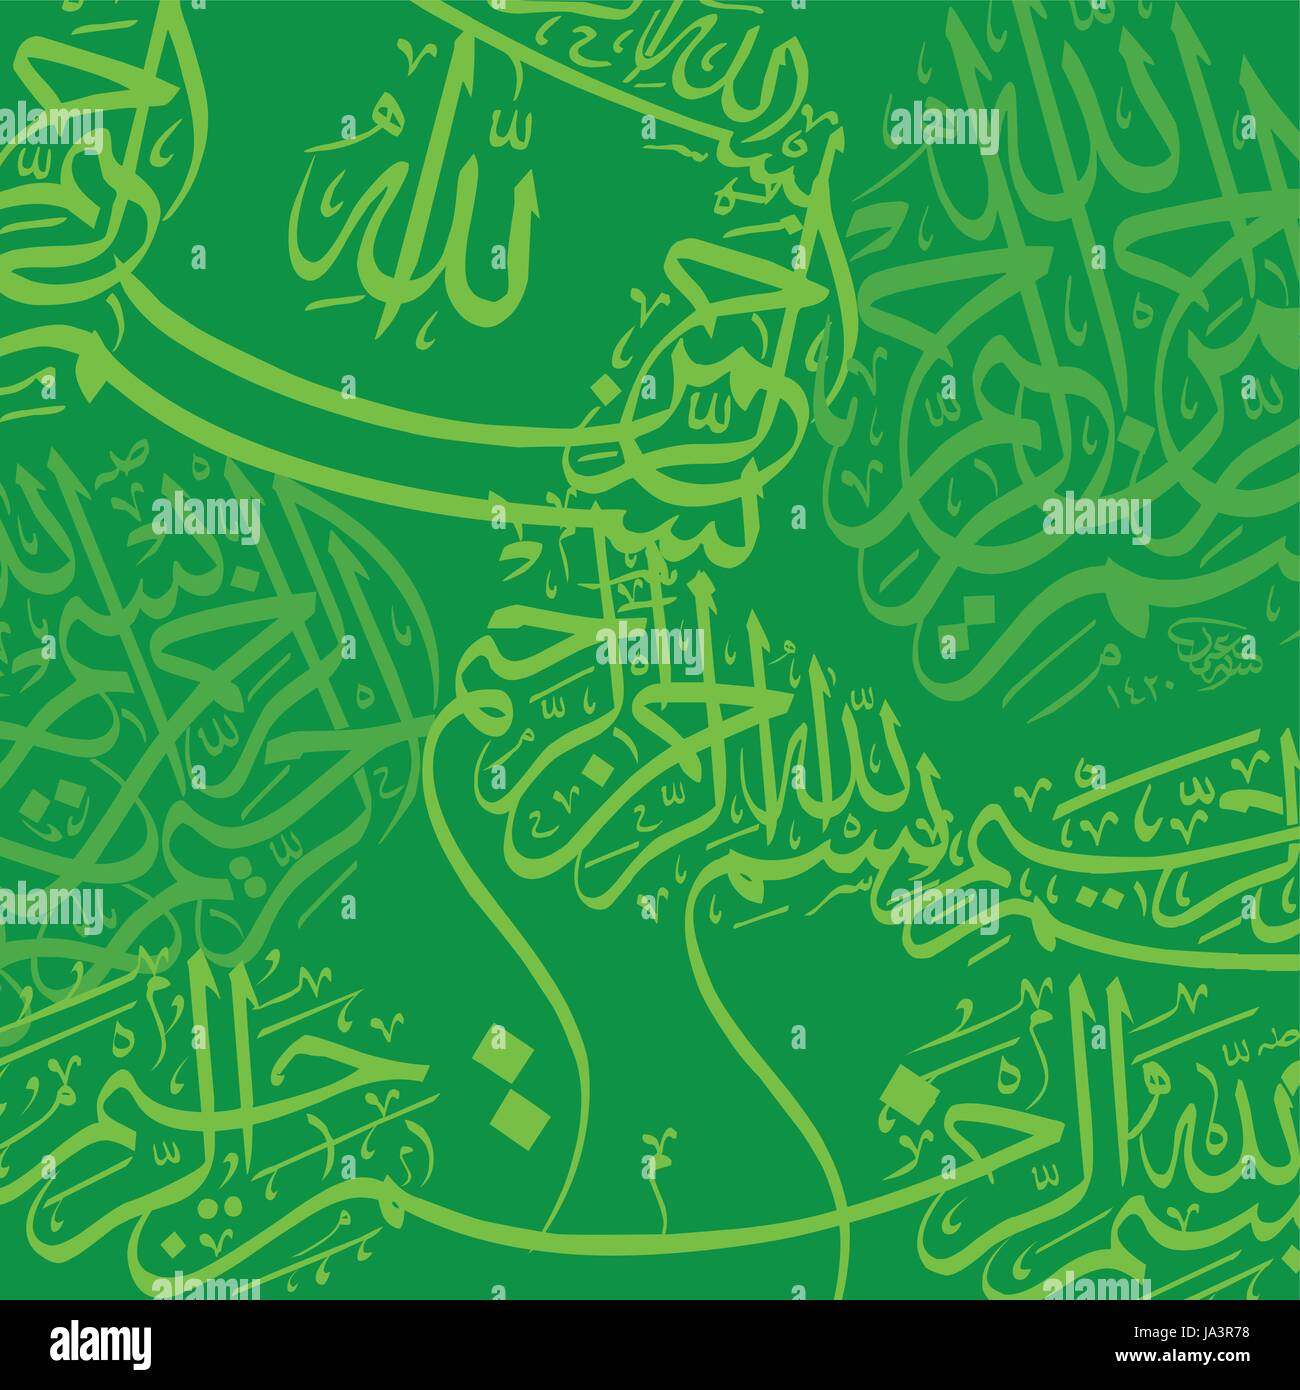 Islamic backgrounds Stock Vector Images - Alamy